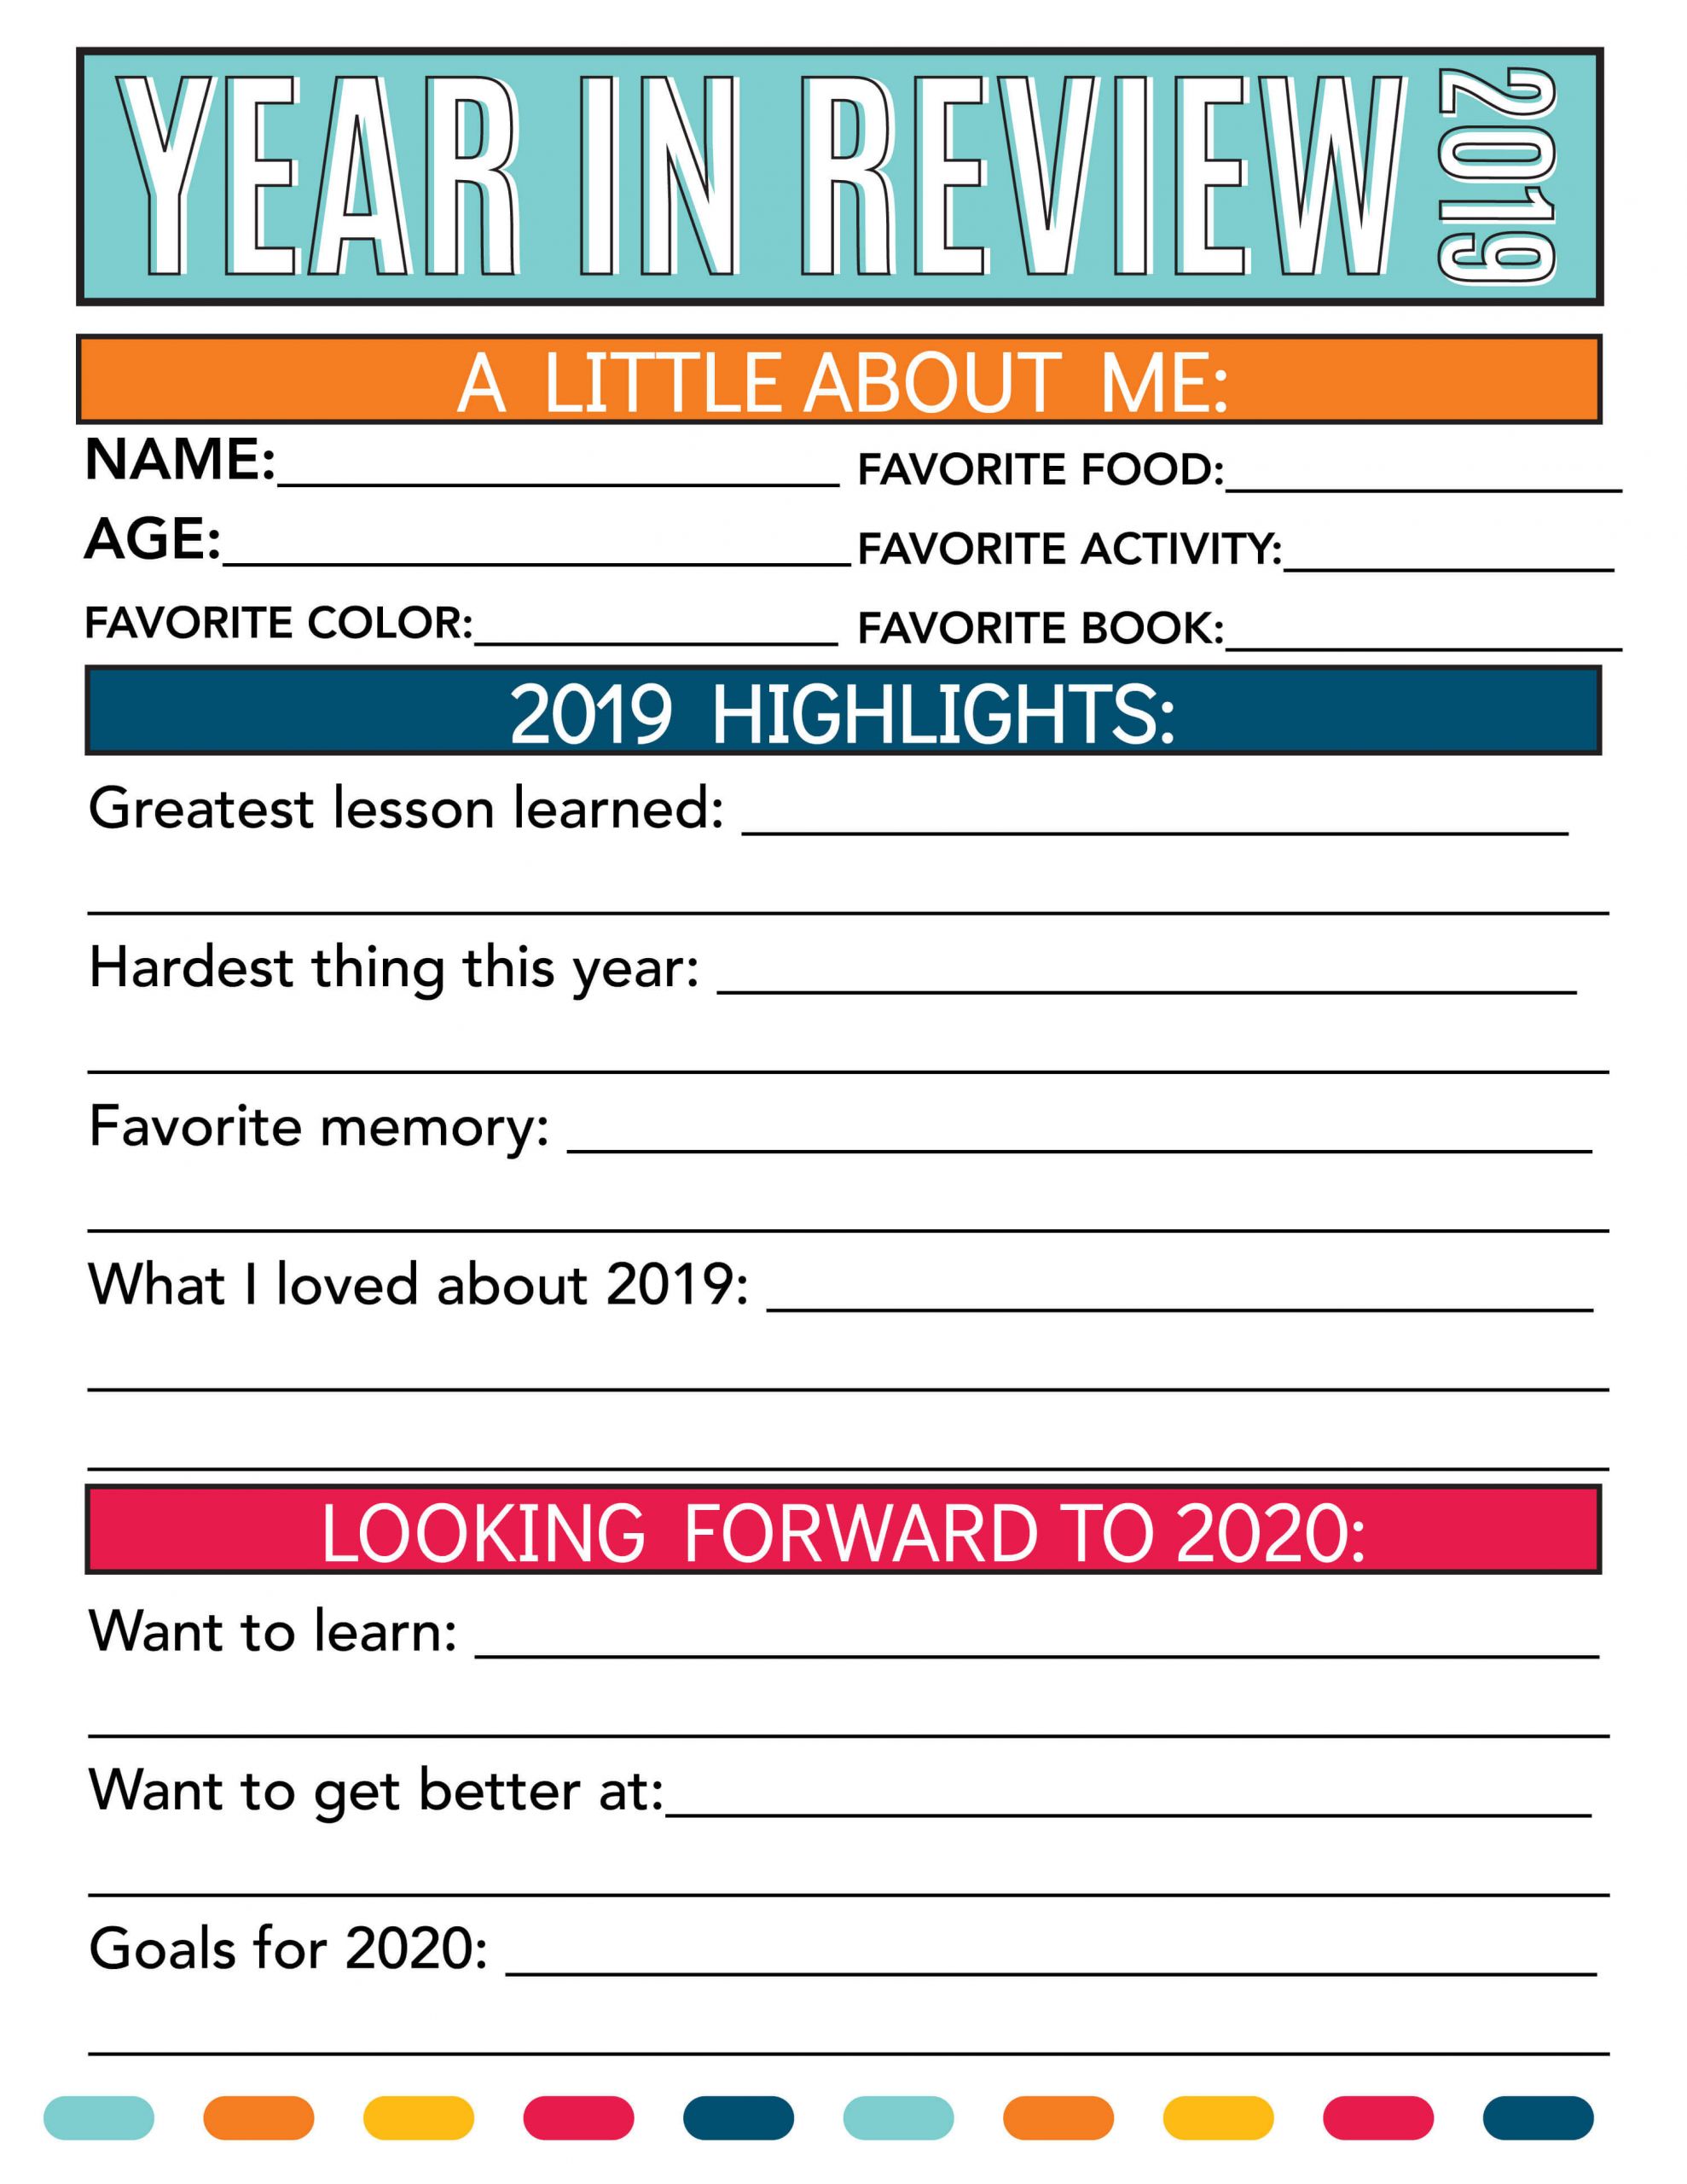 New Year Resolution Ideas 2020
 New Year Resolution for Kids 2019 2020 from 30daysblog